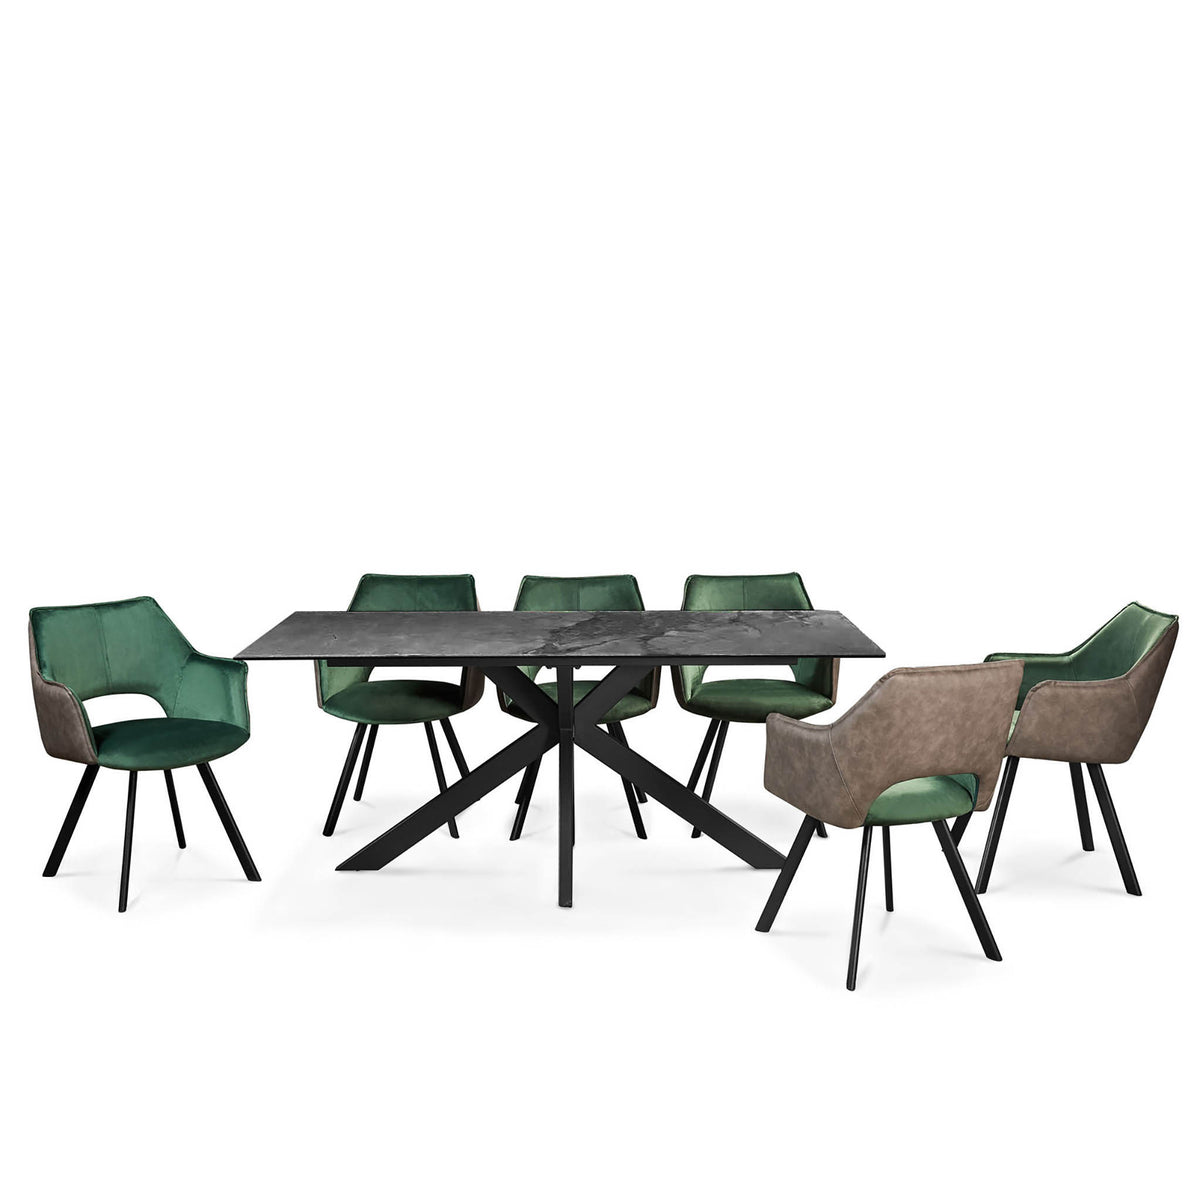 Harlow 180cm Ceramic Dining Table Italia Grey - Shown with Chairs